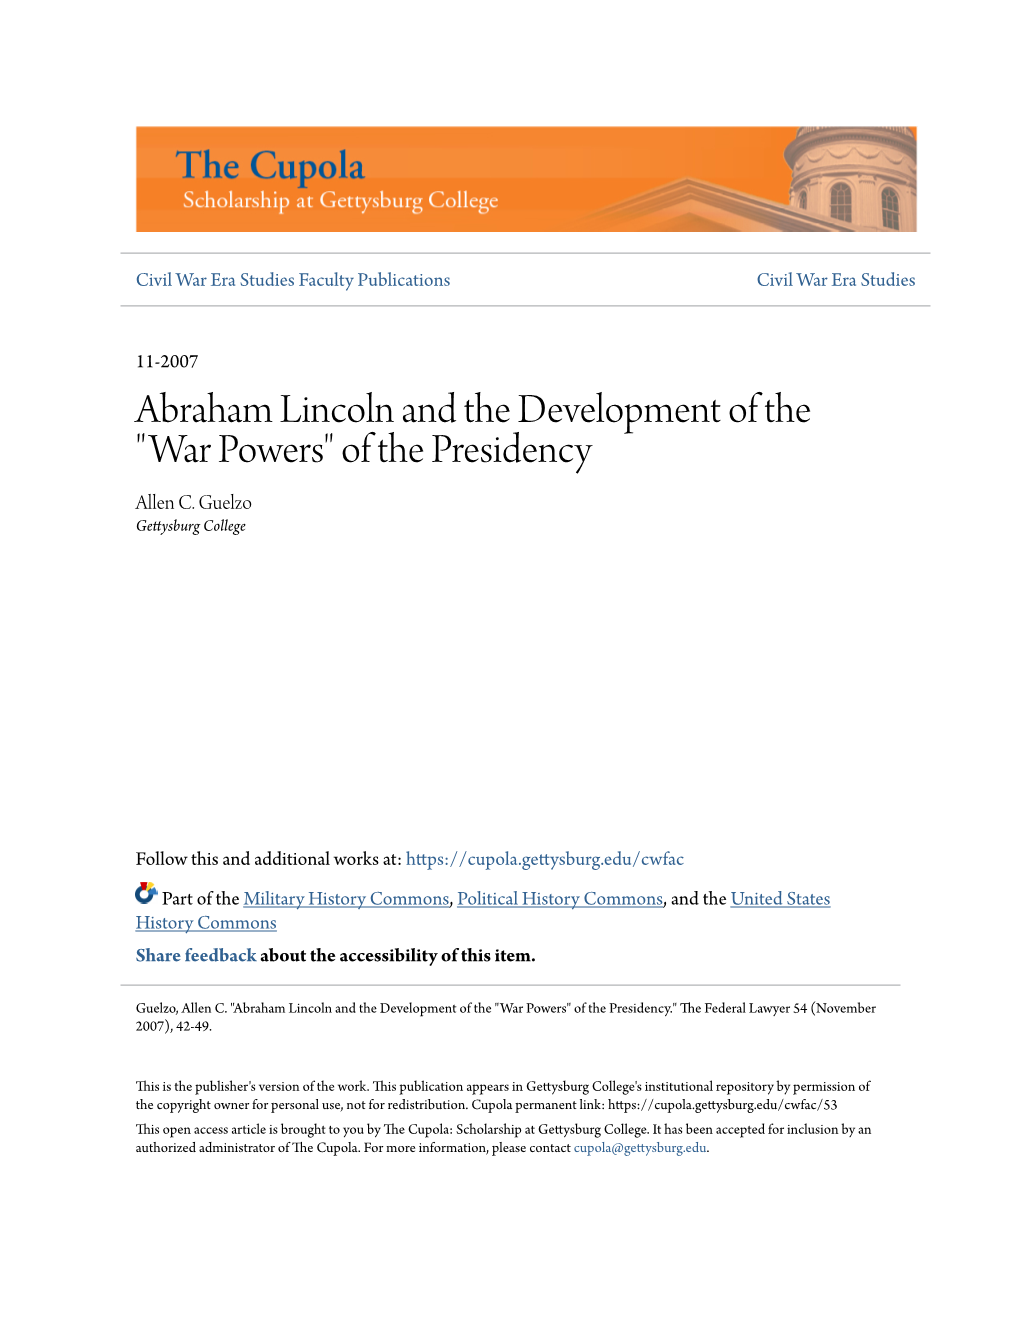 Abraham Lincoln and the Development of the "War Powers" of the Presidency Allen C